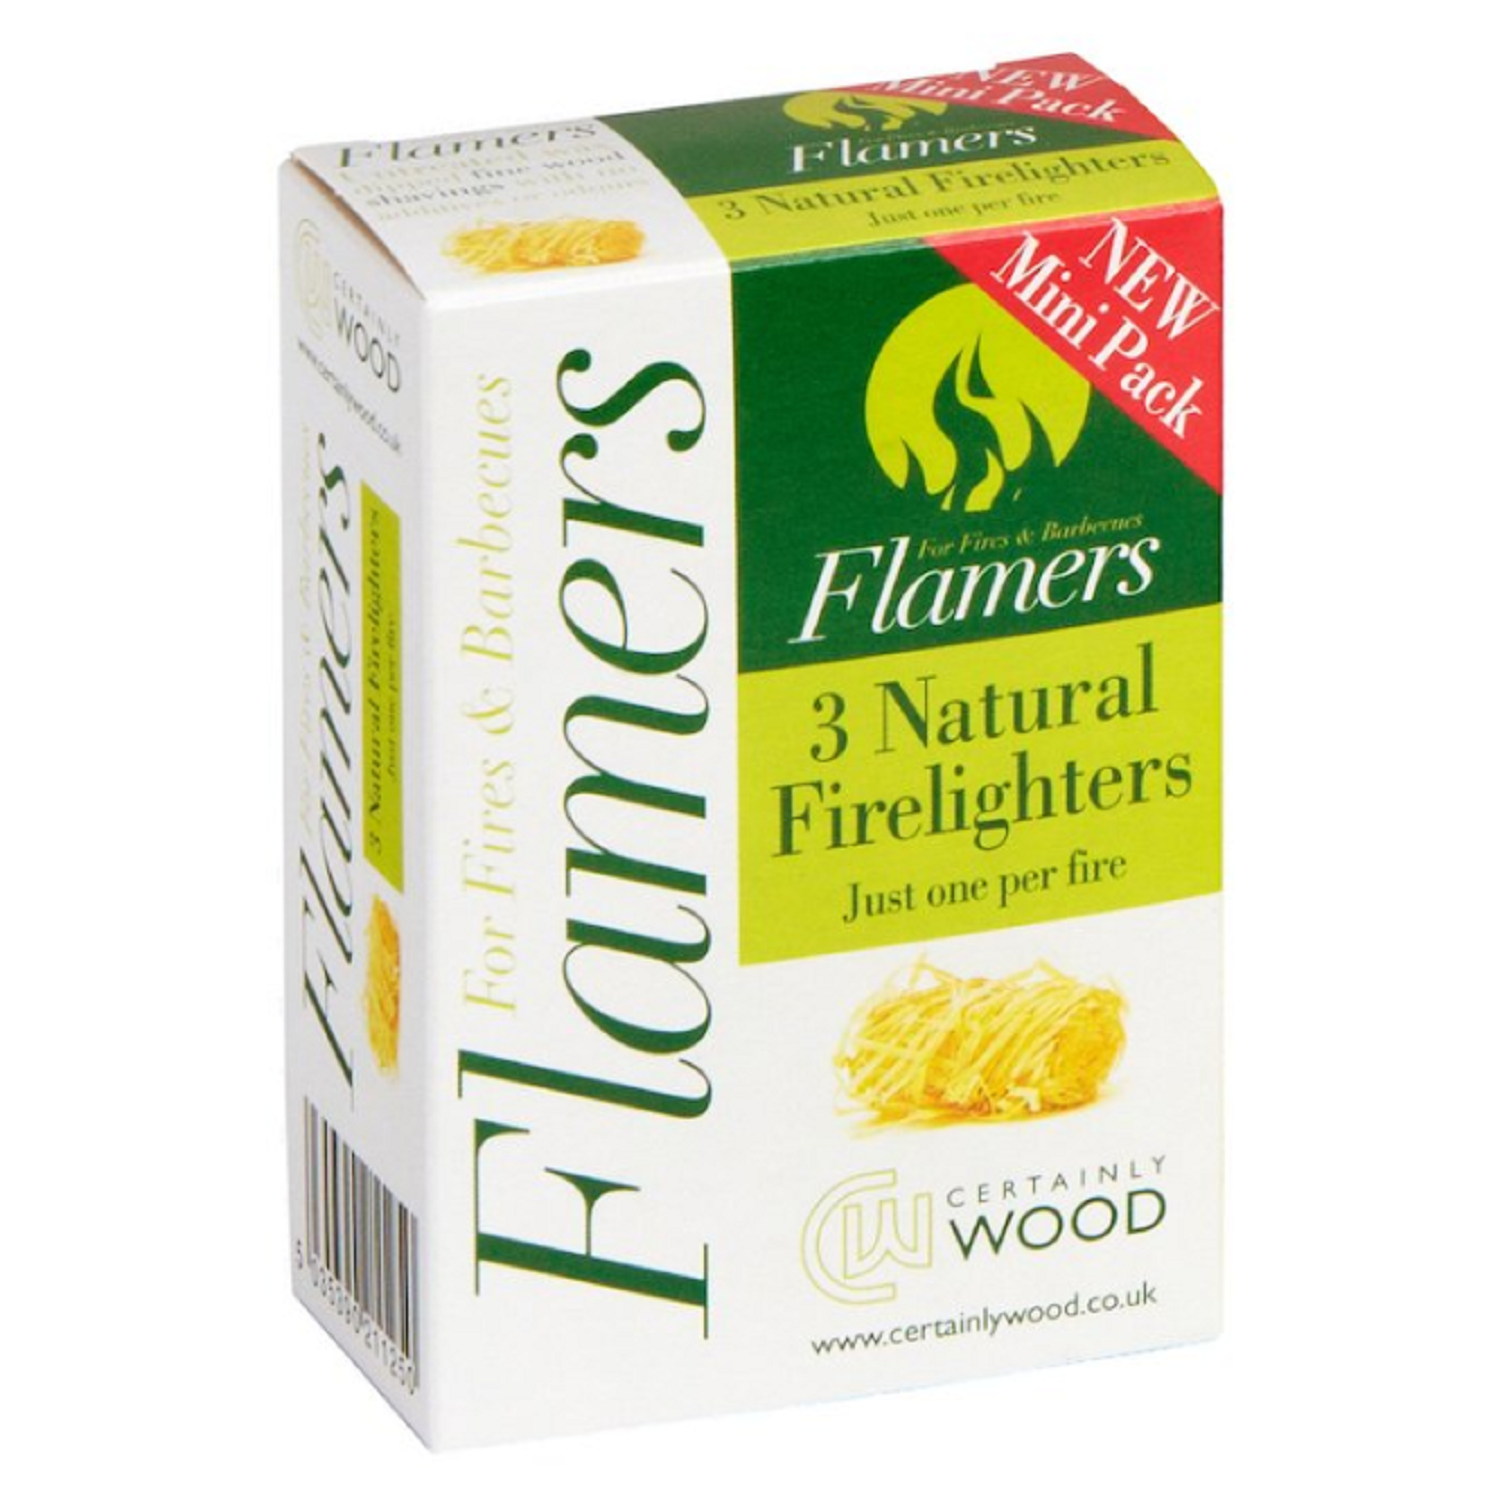 Certainly Wood Flamers Natural Firelighters